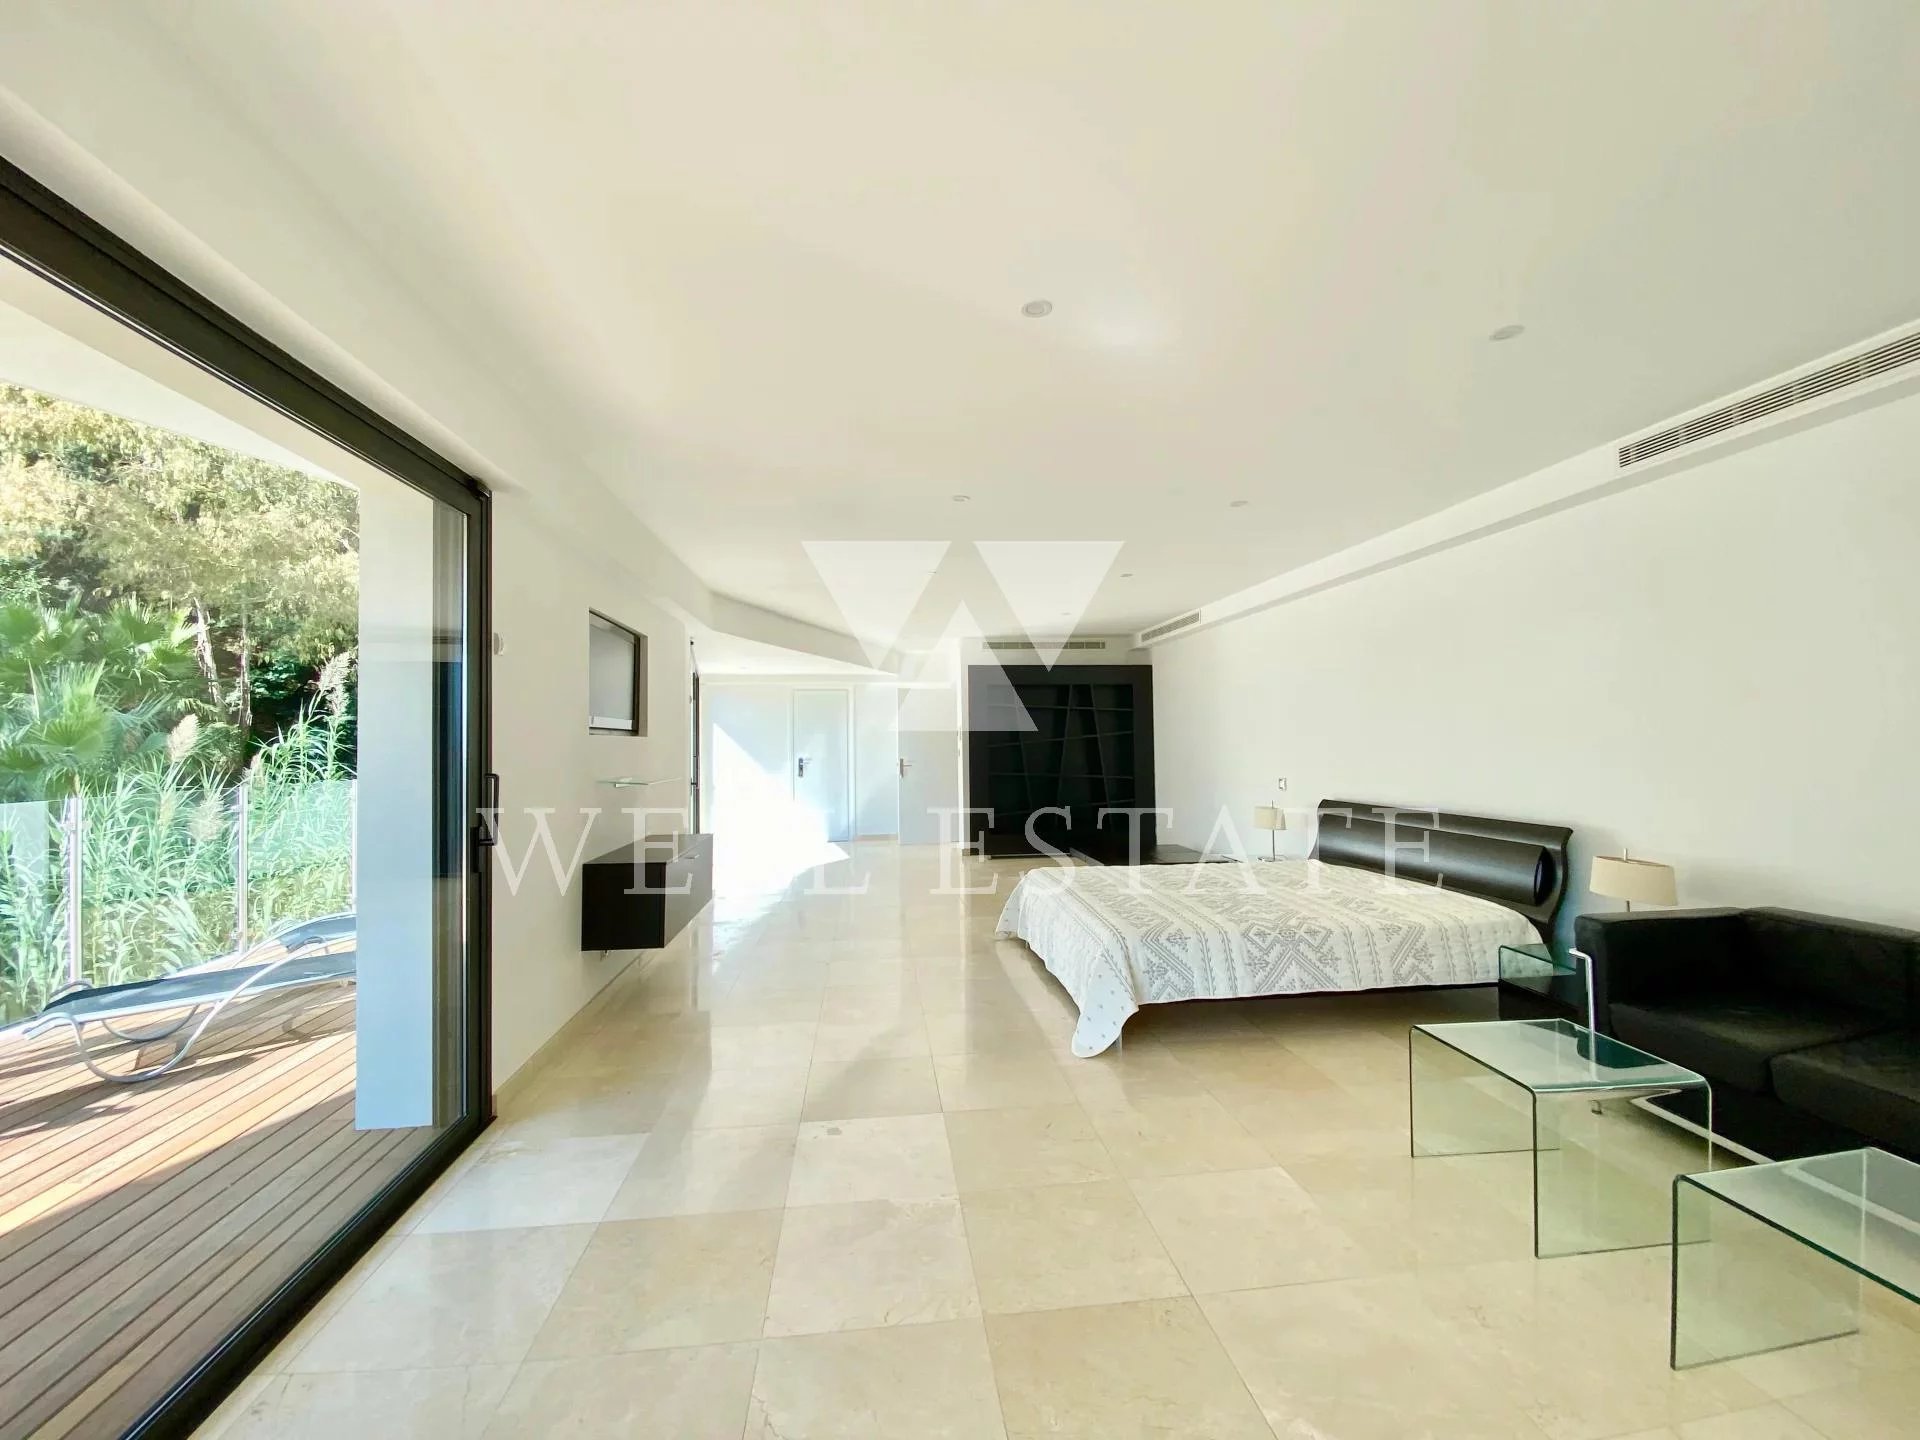 CANNES STYLISH  500M2 CONTEMPORARY VILLA WITH 6 BEDROOMS AND HEATED INFINITY POOL